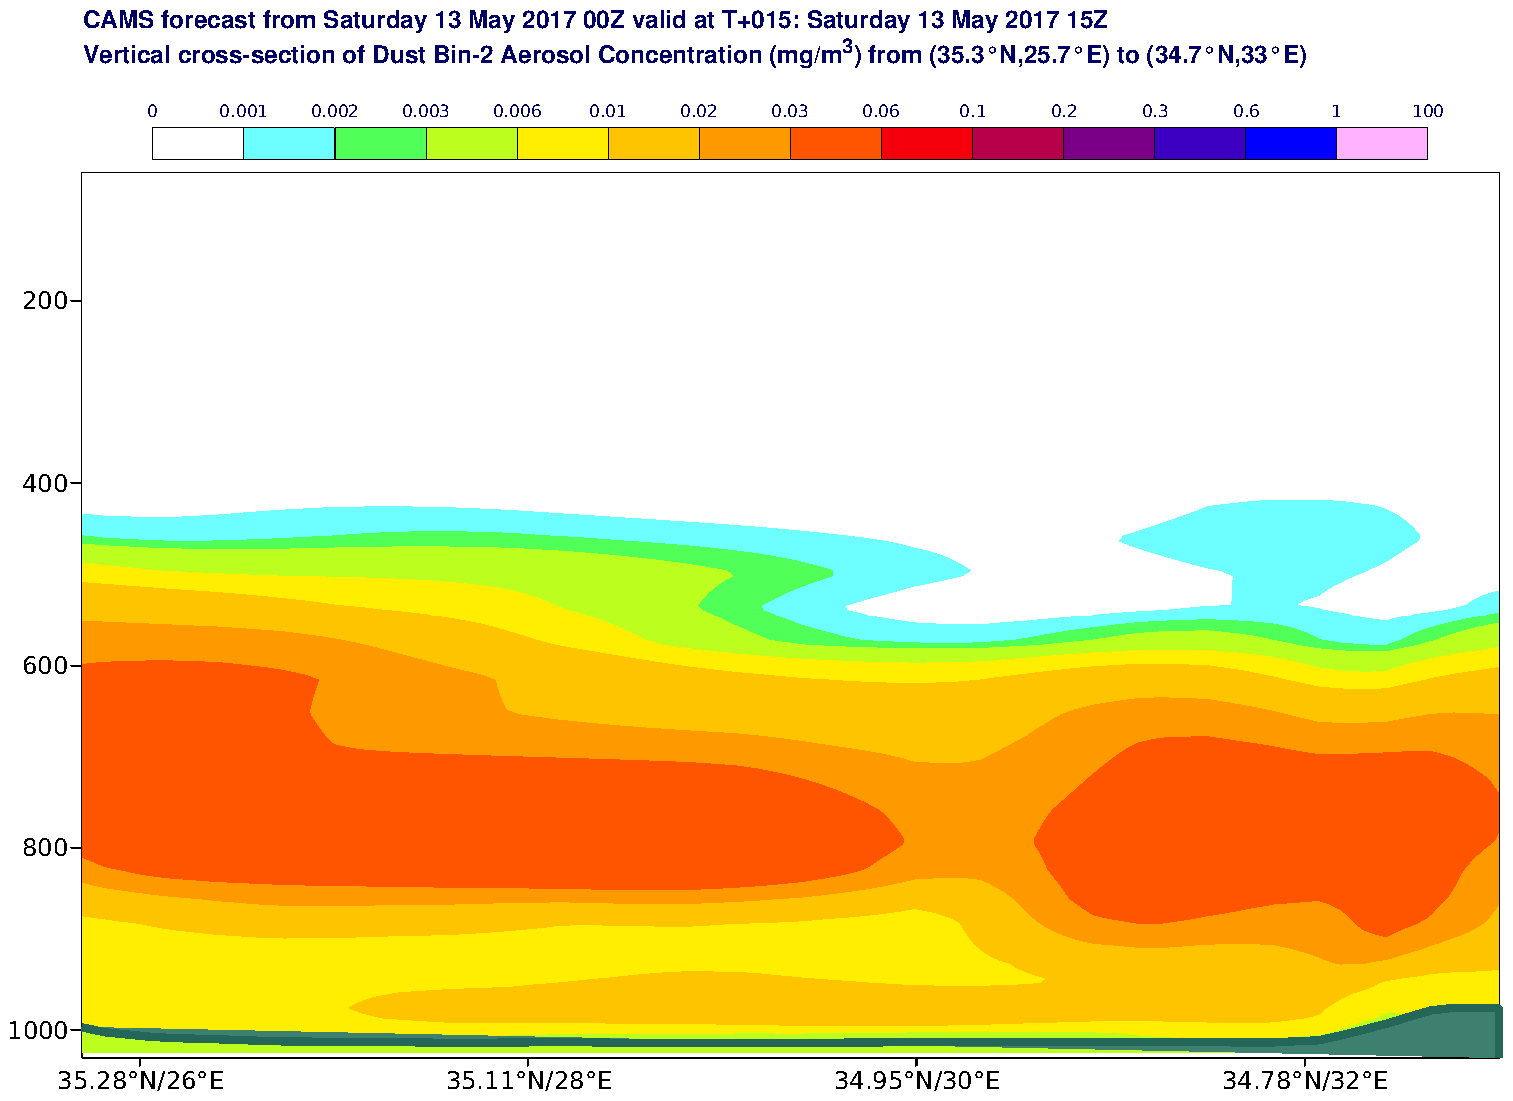 Vertical cross-section of Dust Bin-2 Aerosol Concentration (mg/m3) valid at T15 - 2017-05-13 15:00